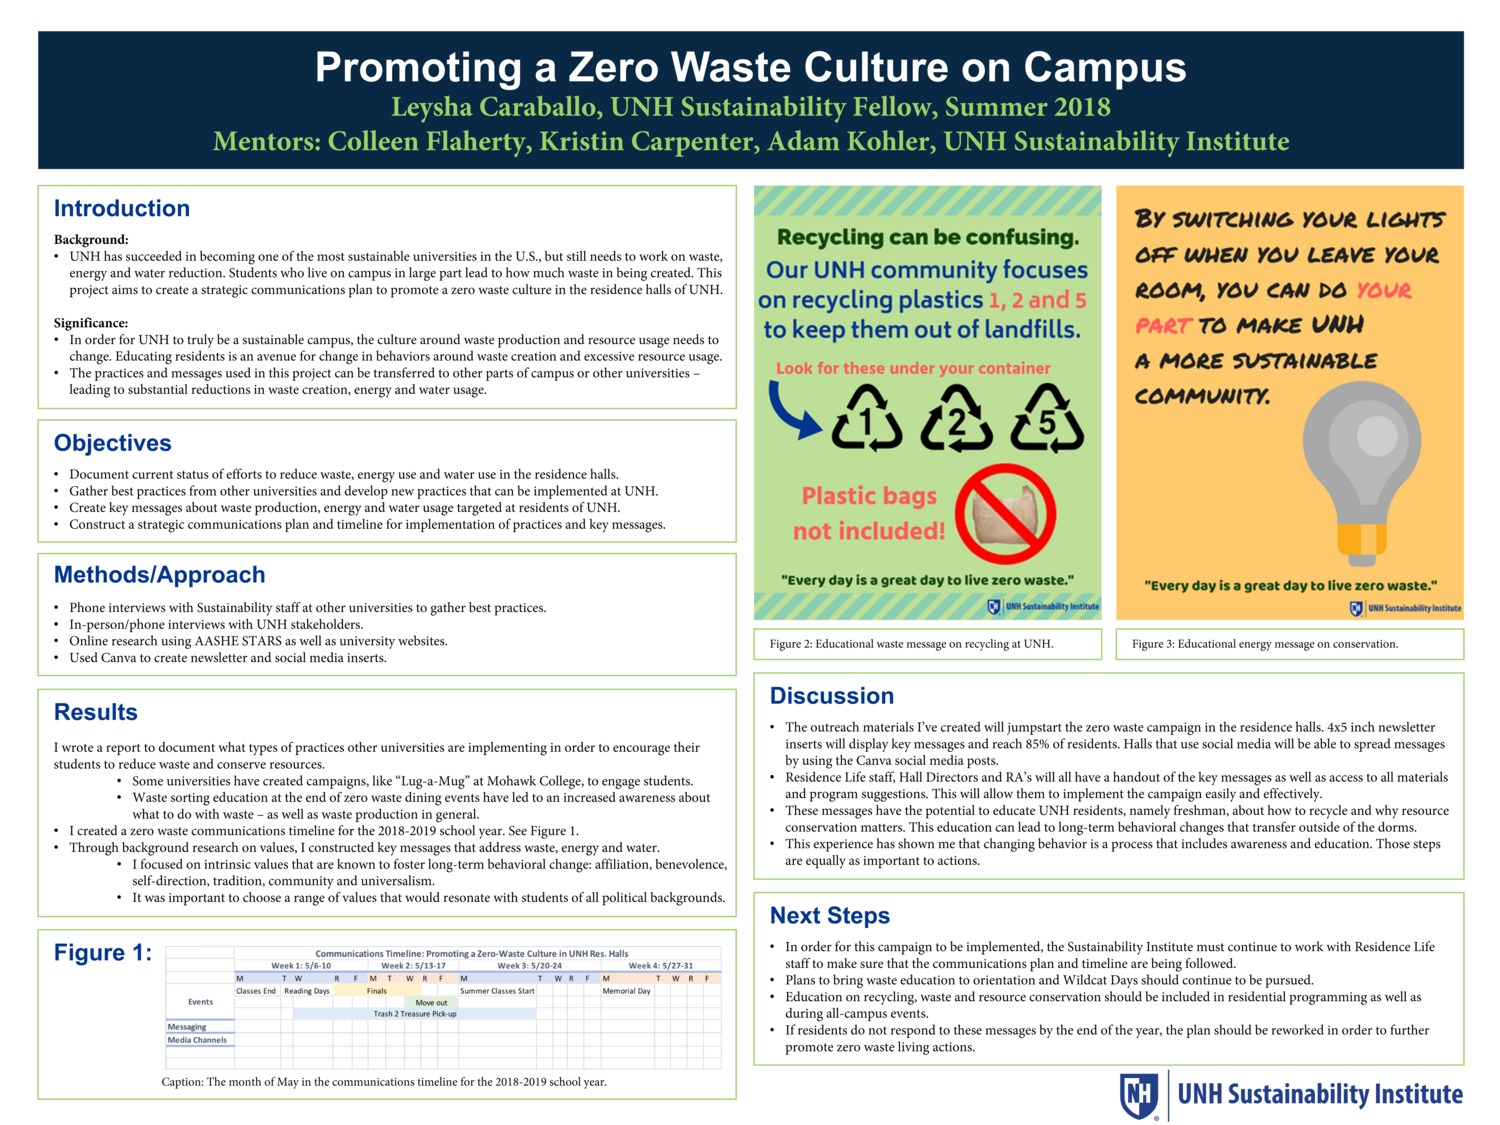 Promoting A Zero Waste Culture On Campus by lcarabal